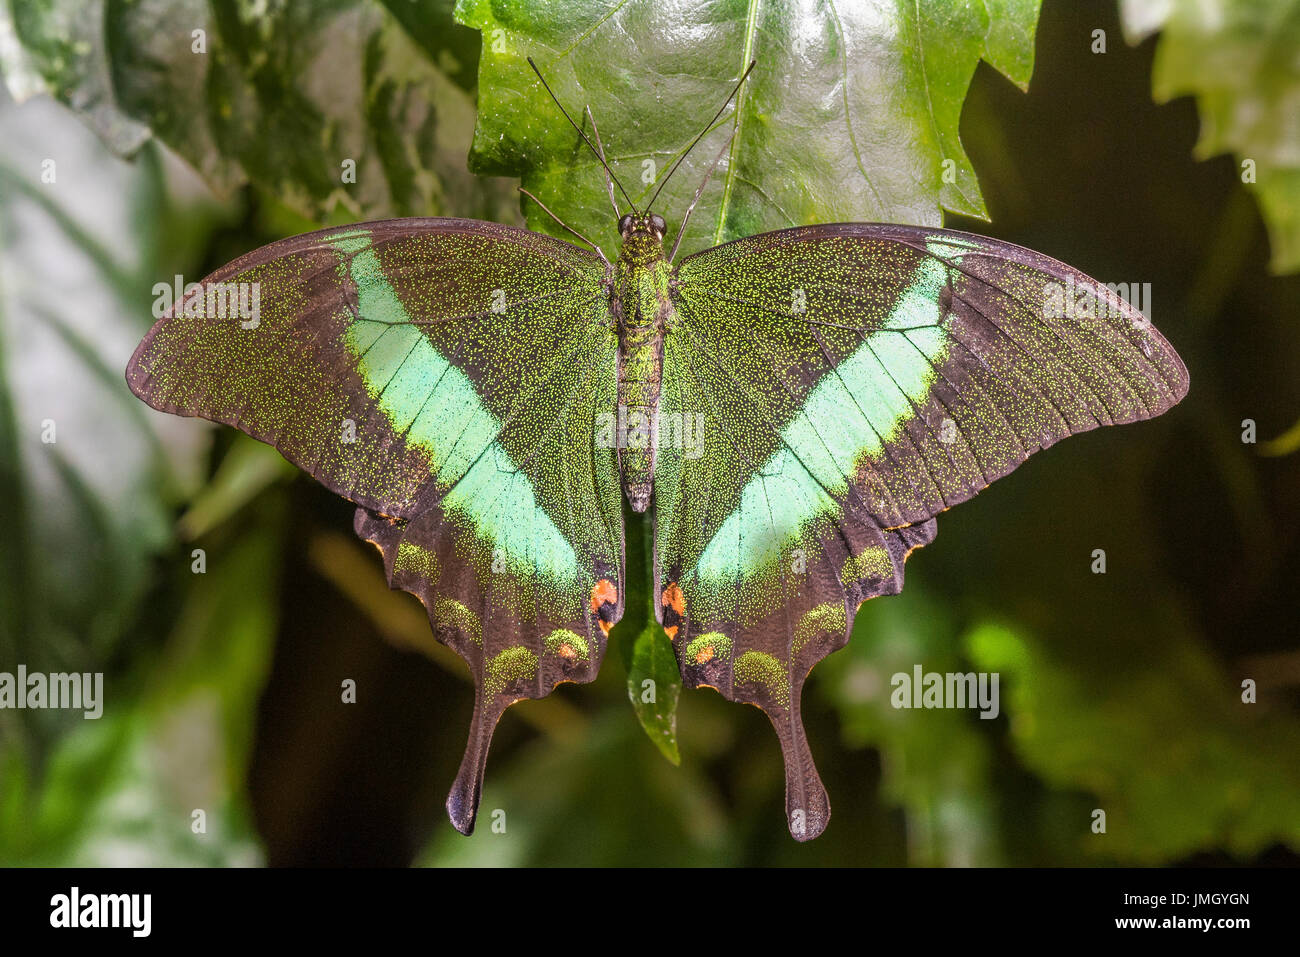 The Green-banded Swallowtail butterfly Stock Photo